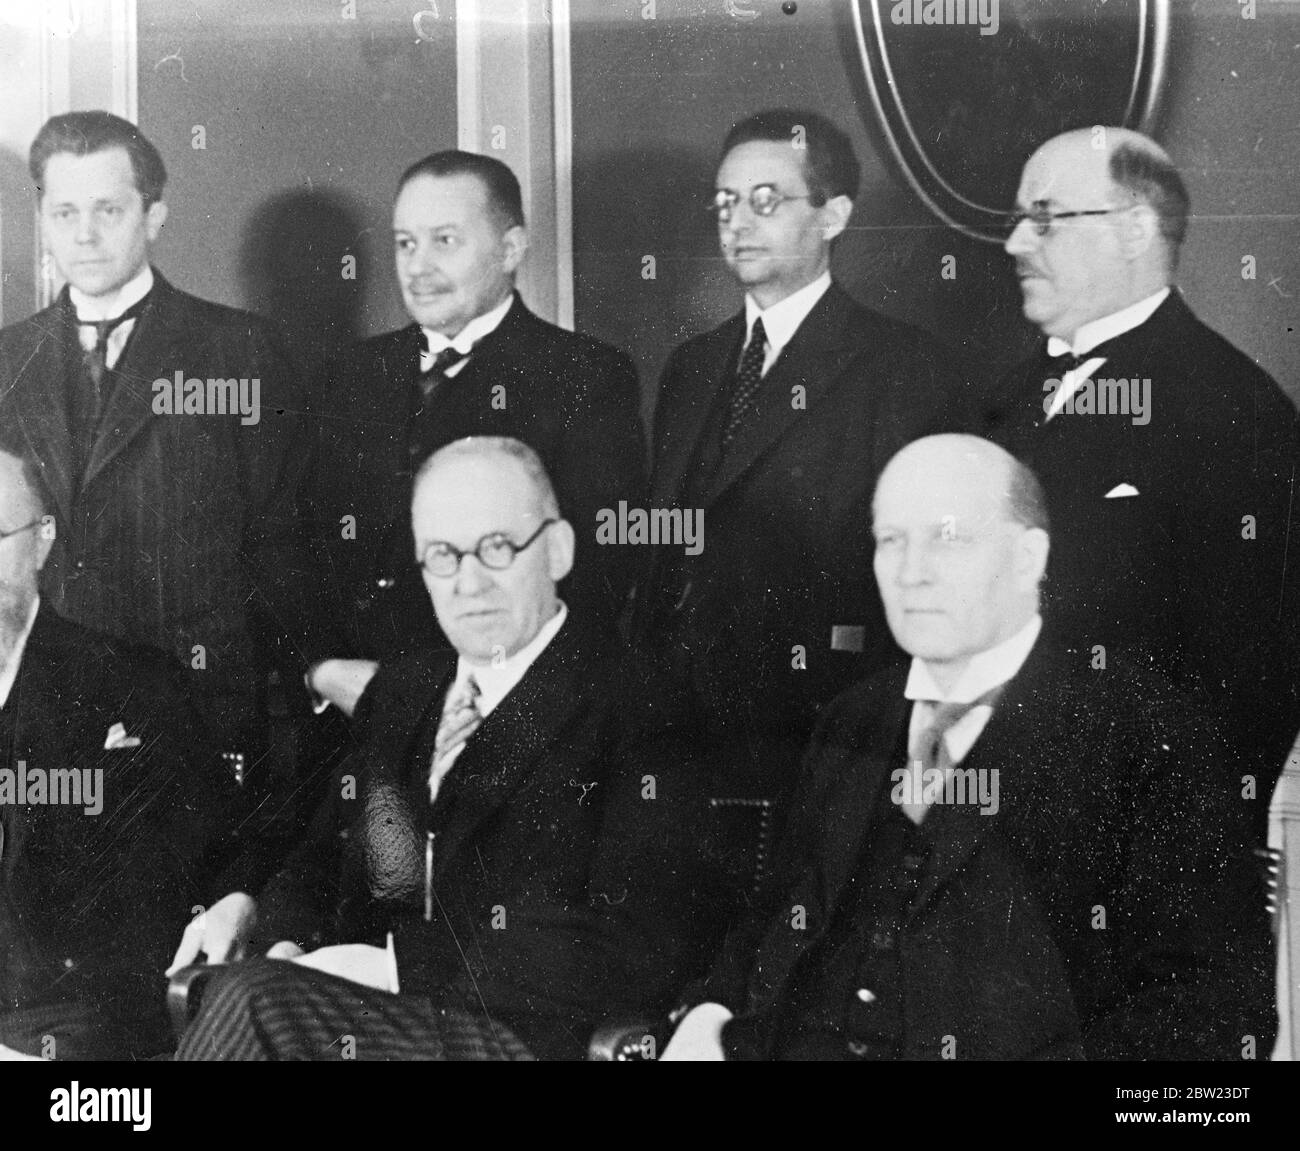 Danish Thorvald Stauning ' s Coalition Cabinet, Stauning III Left to right: front row: Thorvald Stauning, Prime Minister [cut out of the picture], Karl Kristian Steincke, Justice Minister; Peter Munch, Foreign Minister; back row: Bertel Dahlgaard, Interior Minister; Ludvig Christensen, Ministry of Social Affairs; Alsing Andersen, Minister of Defense; Johannes KjÃ¦rbÃ¸l [Kjaerbol], Minister for Industry. July 1937 ? Stock Photo